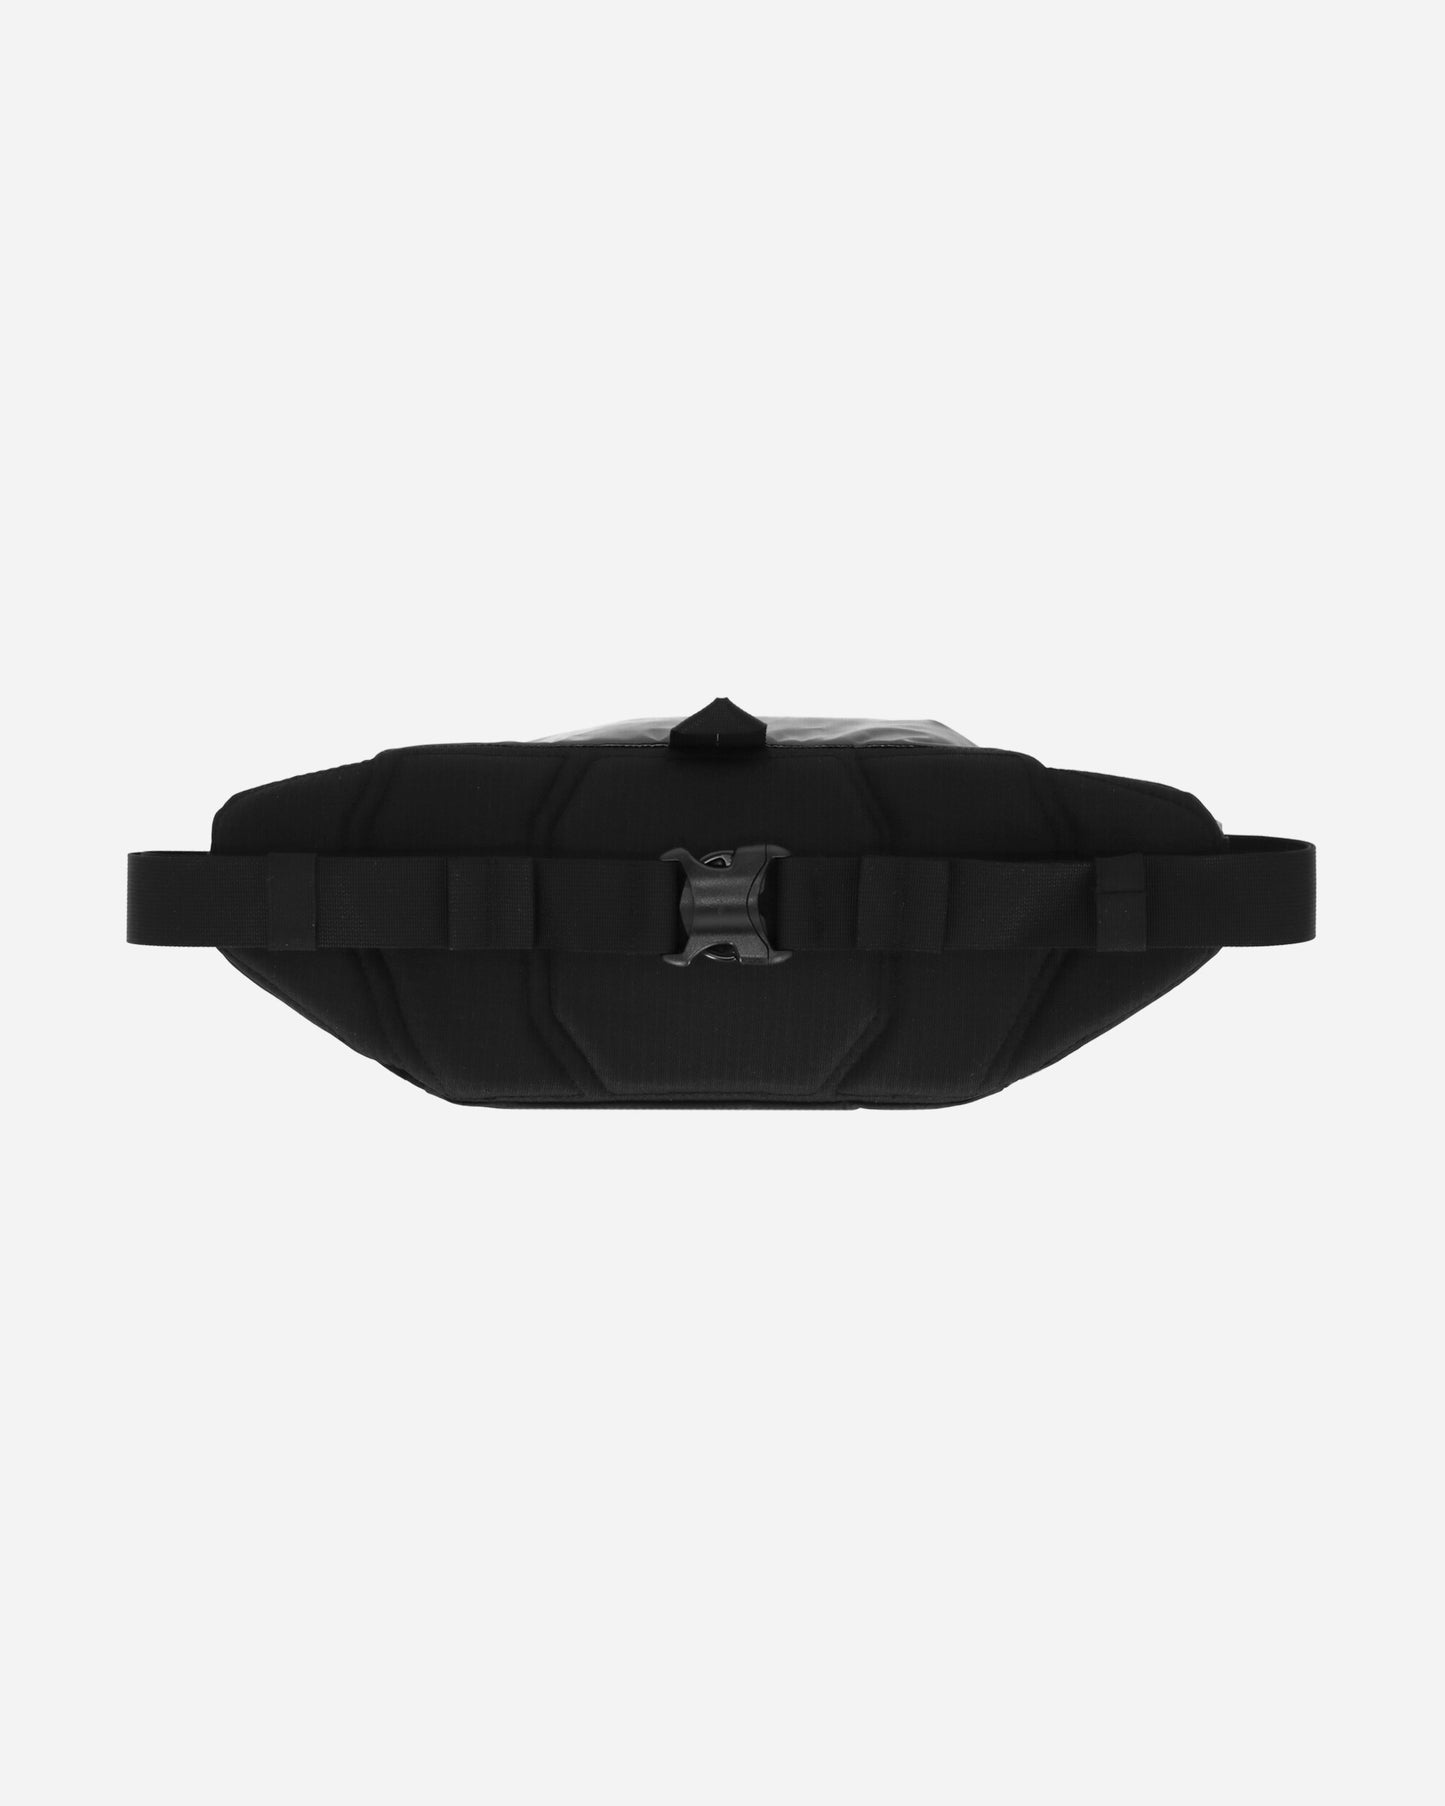 Patagonia Black Hole Waist Pack 5L Black Bags and Backpacks Waistbags 49281 BLK